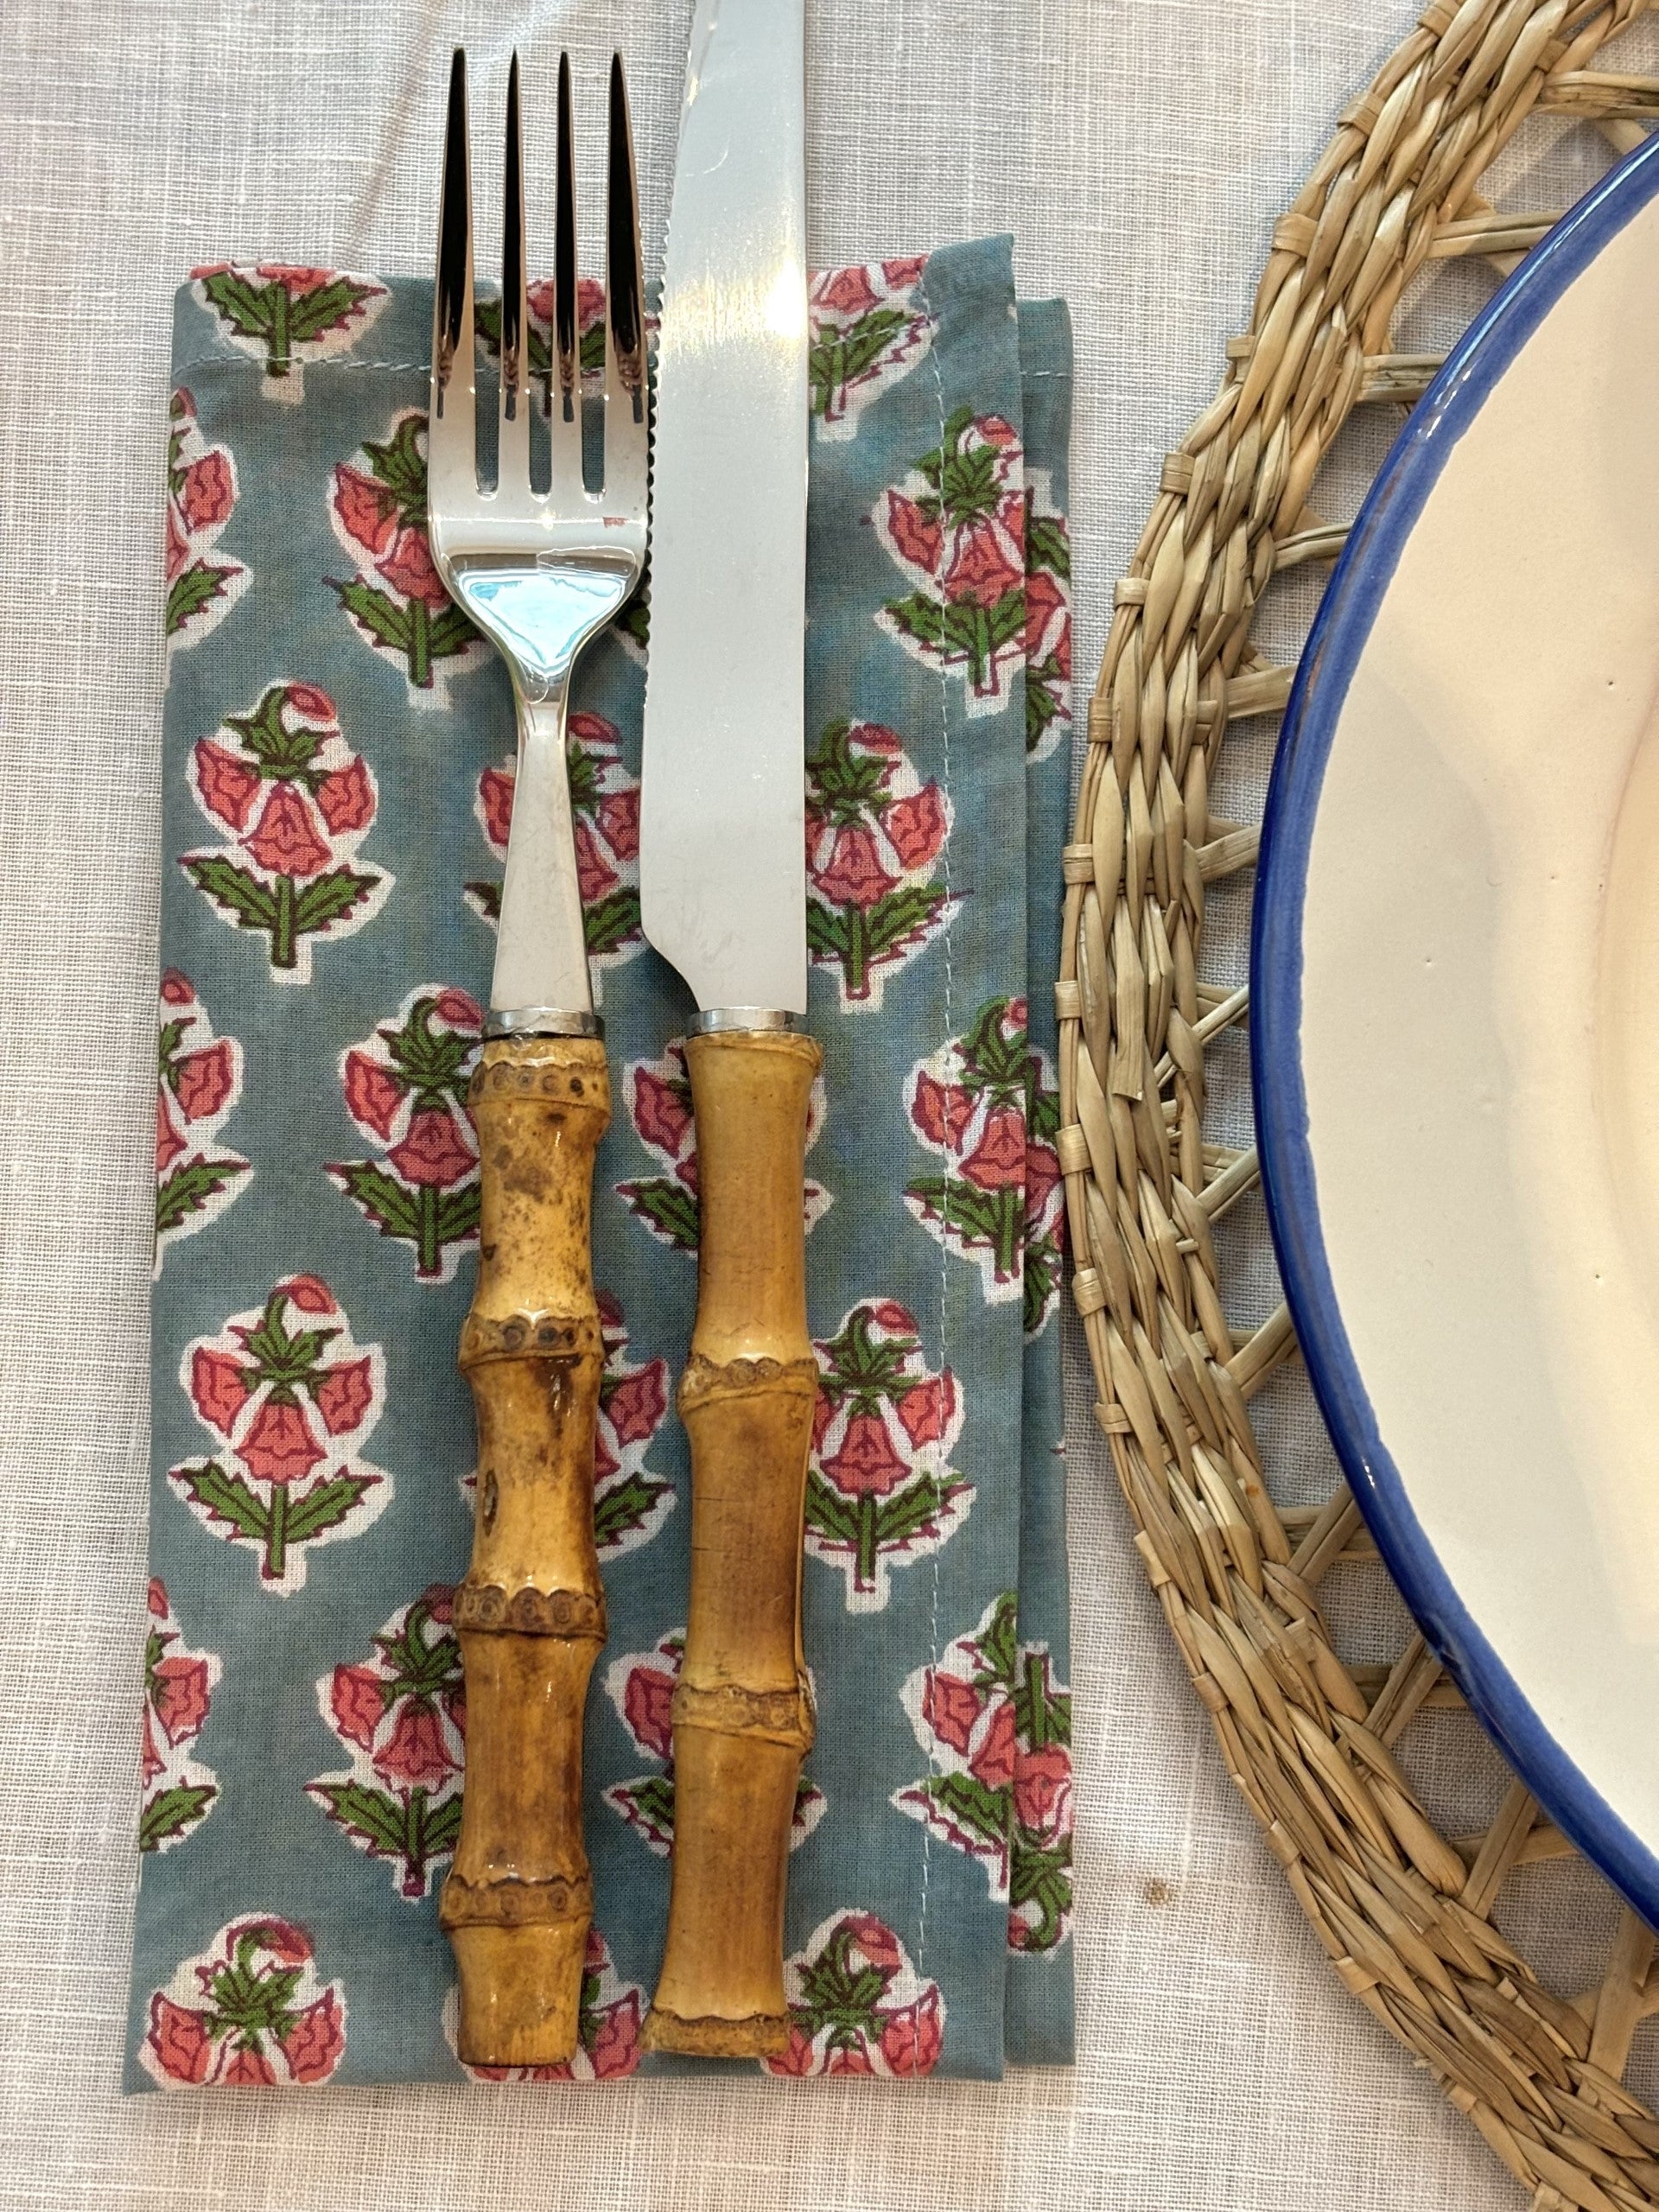 A blue and pink floral block printed napkin with bamboo cutlery on top next to a placemat.